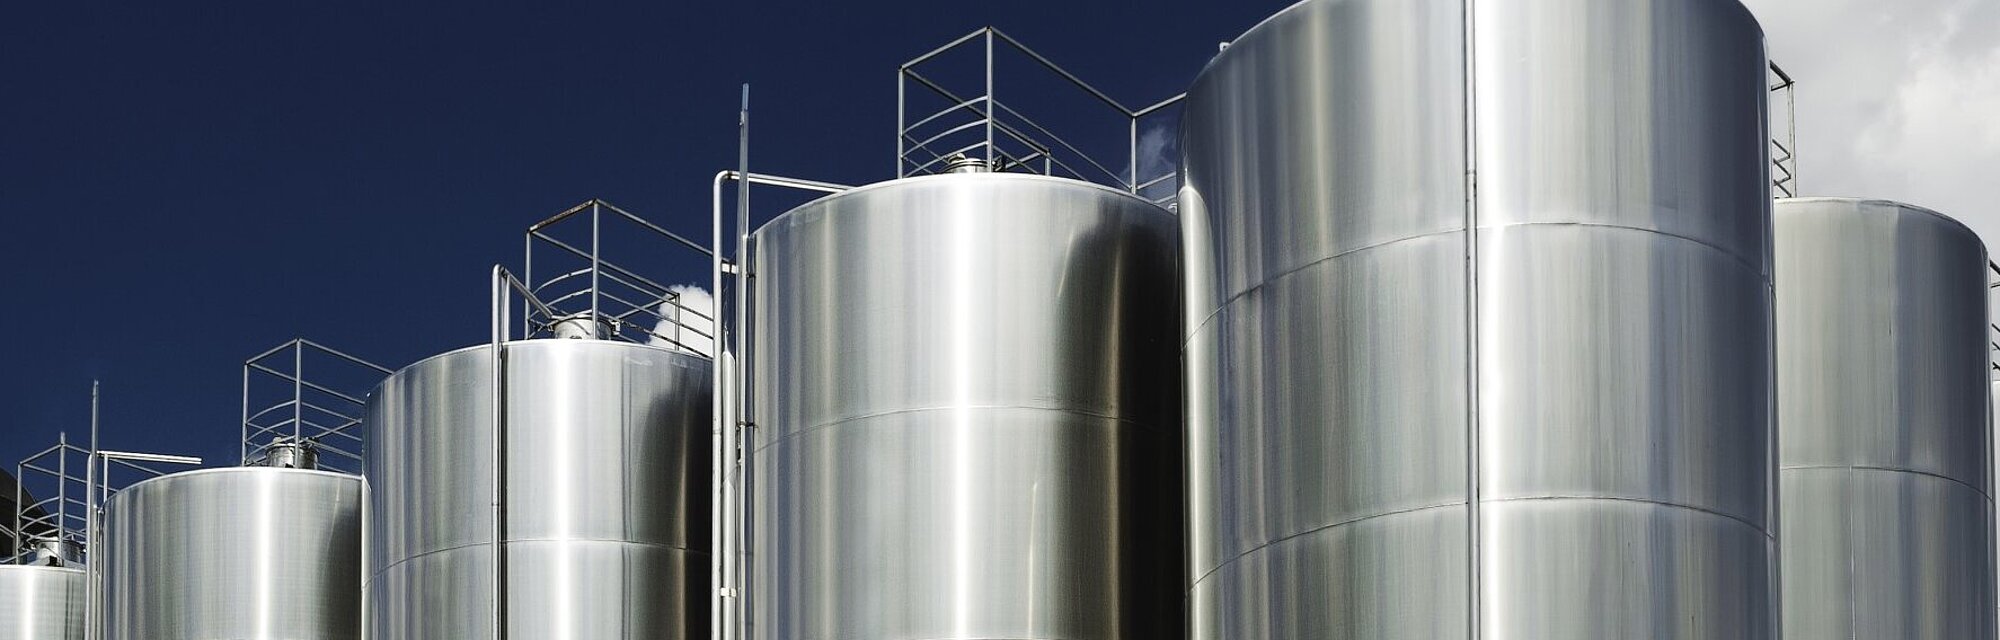 Protection of Storage Tanks for Ethanol and other Alcohols